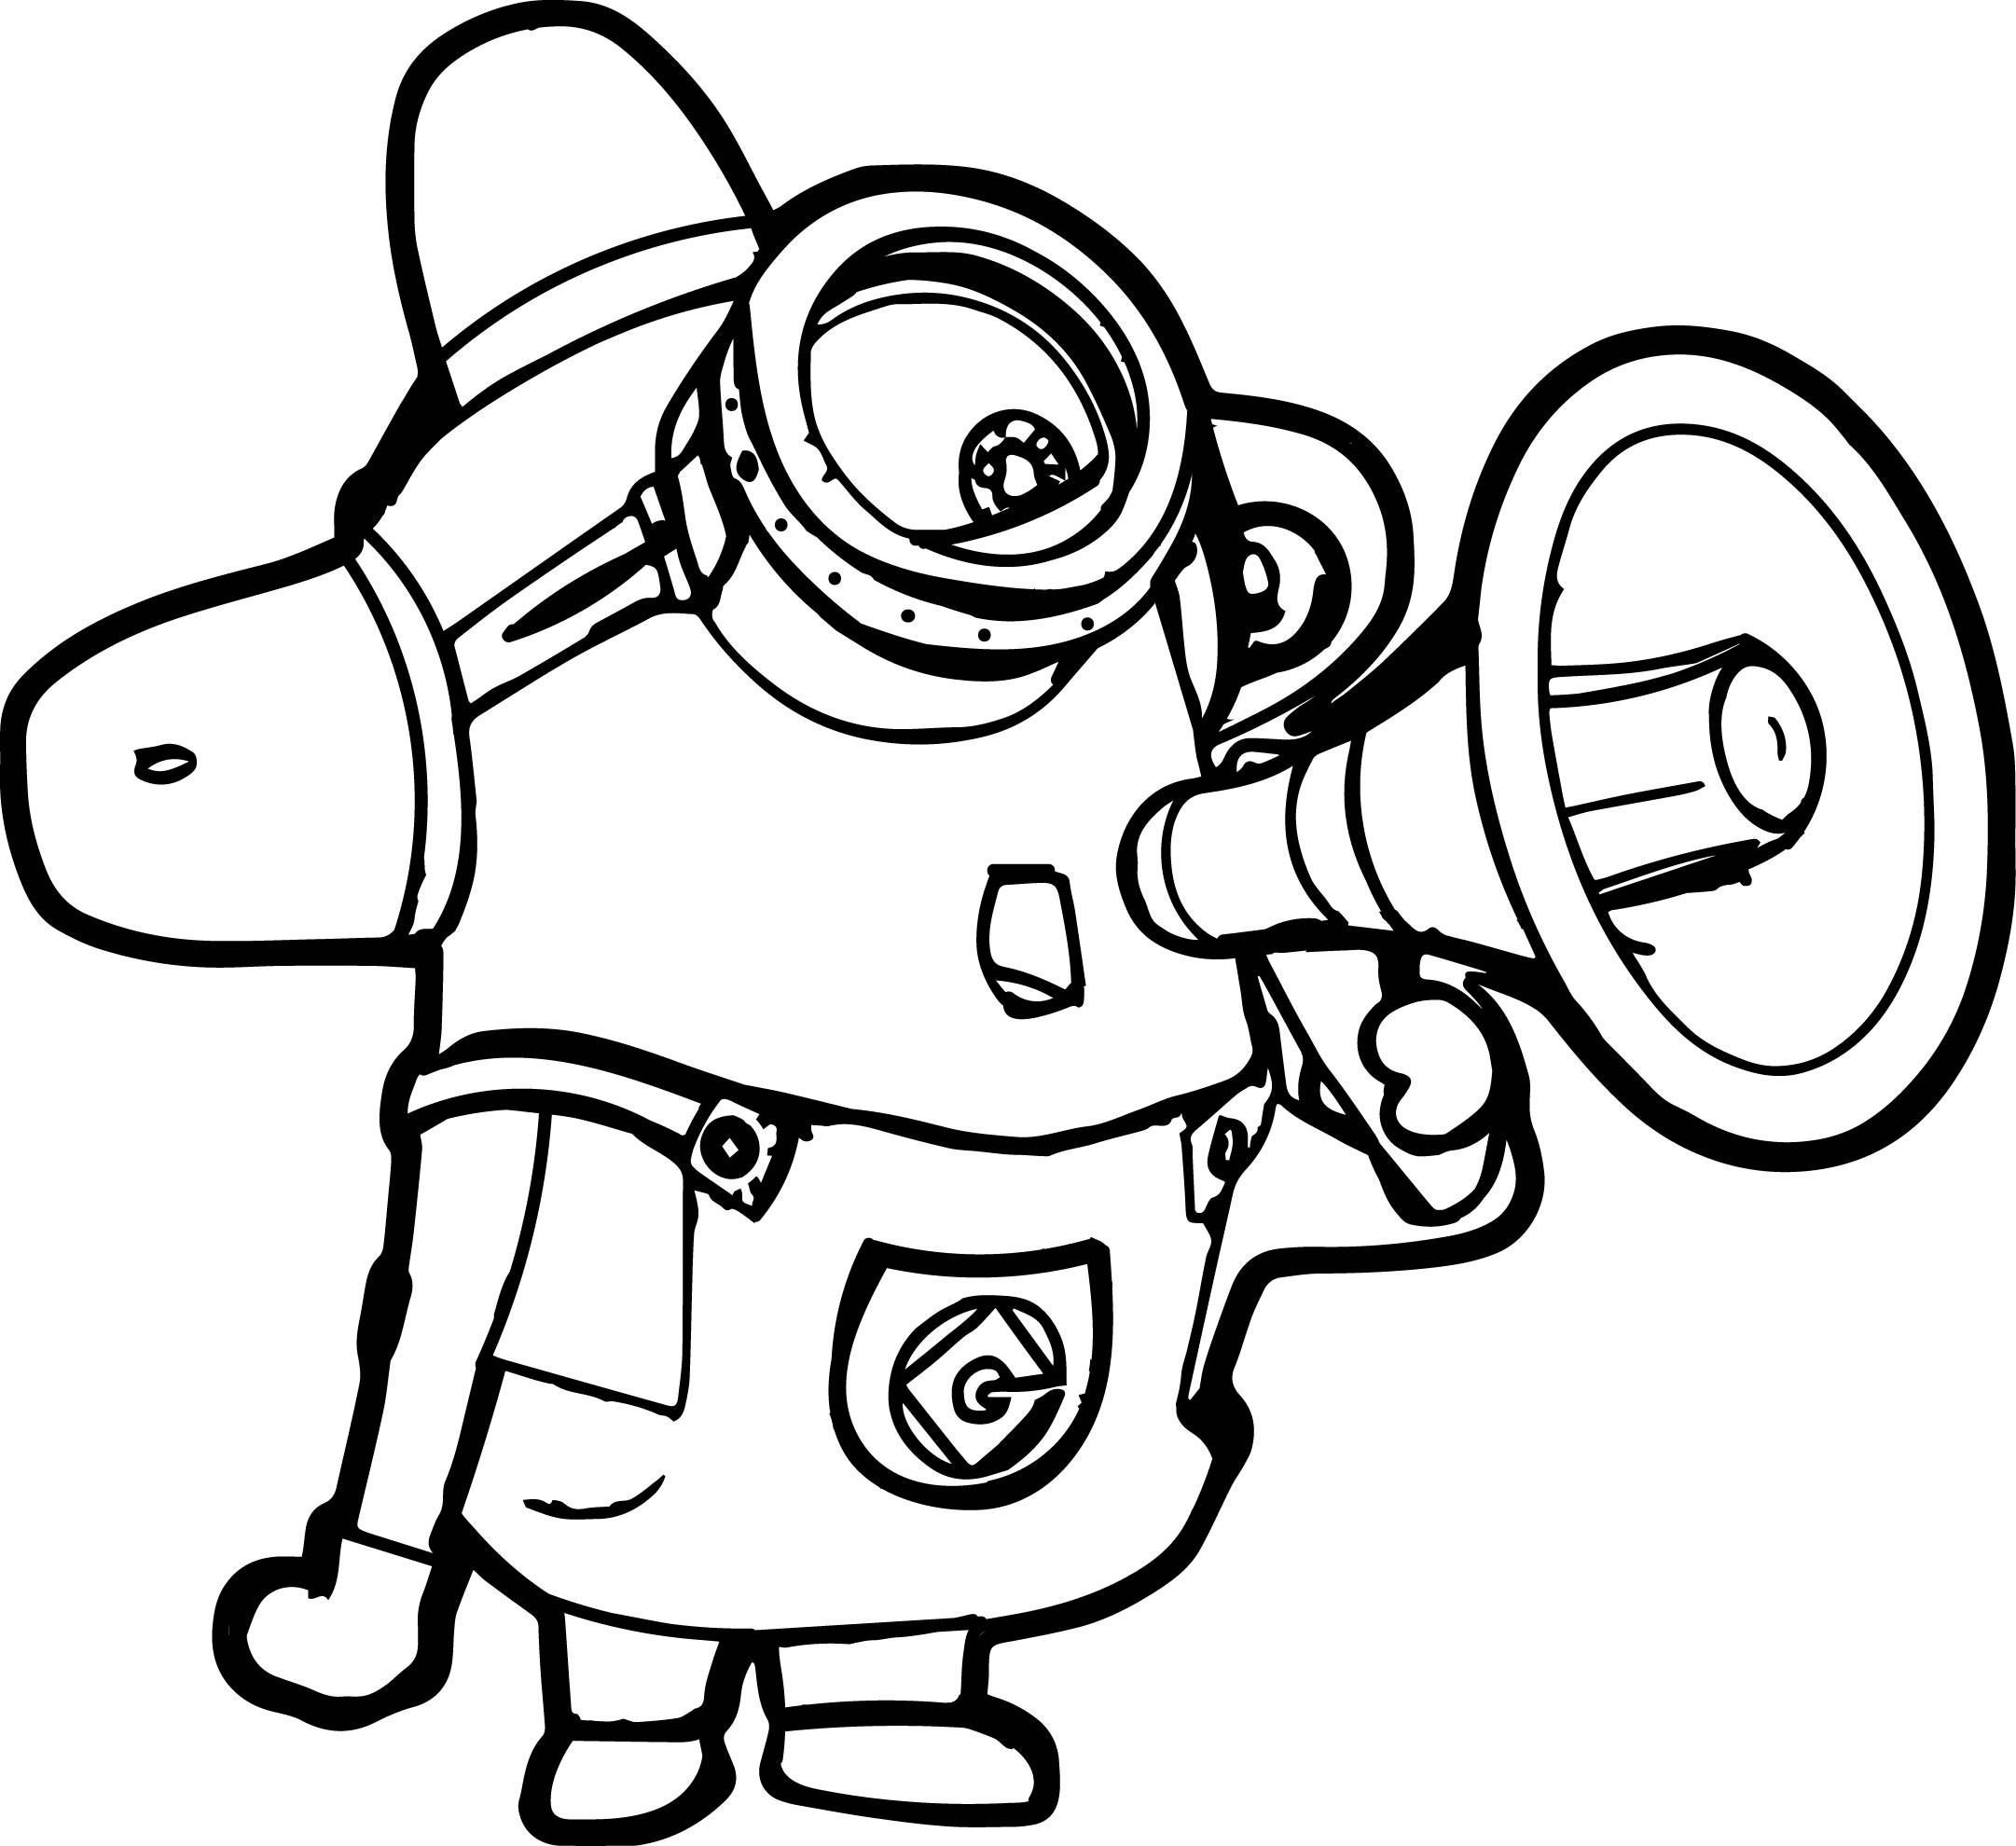 Minions Coloring Pages Printable
 Minion Coloring Pages Best Coloring Pages For Kids